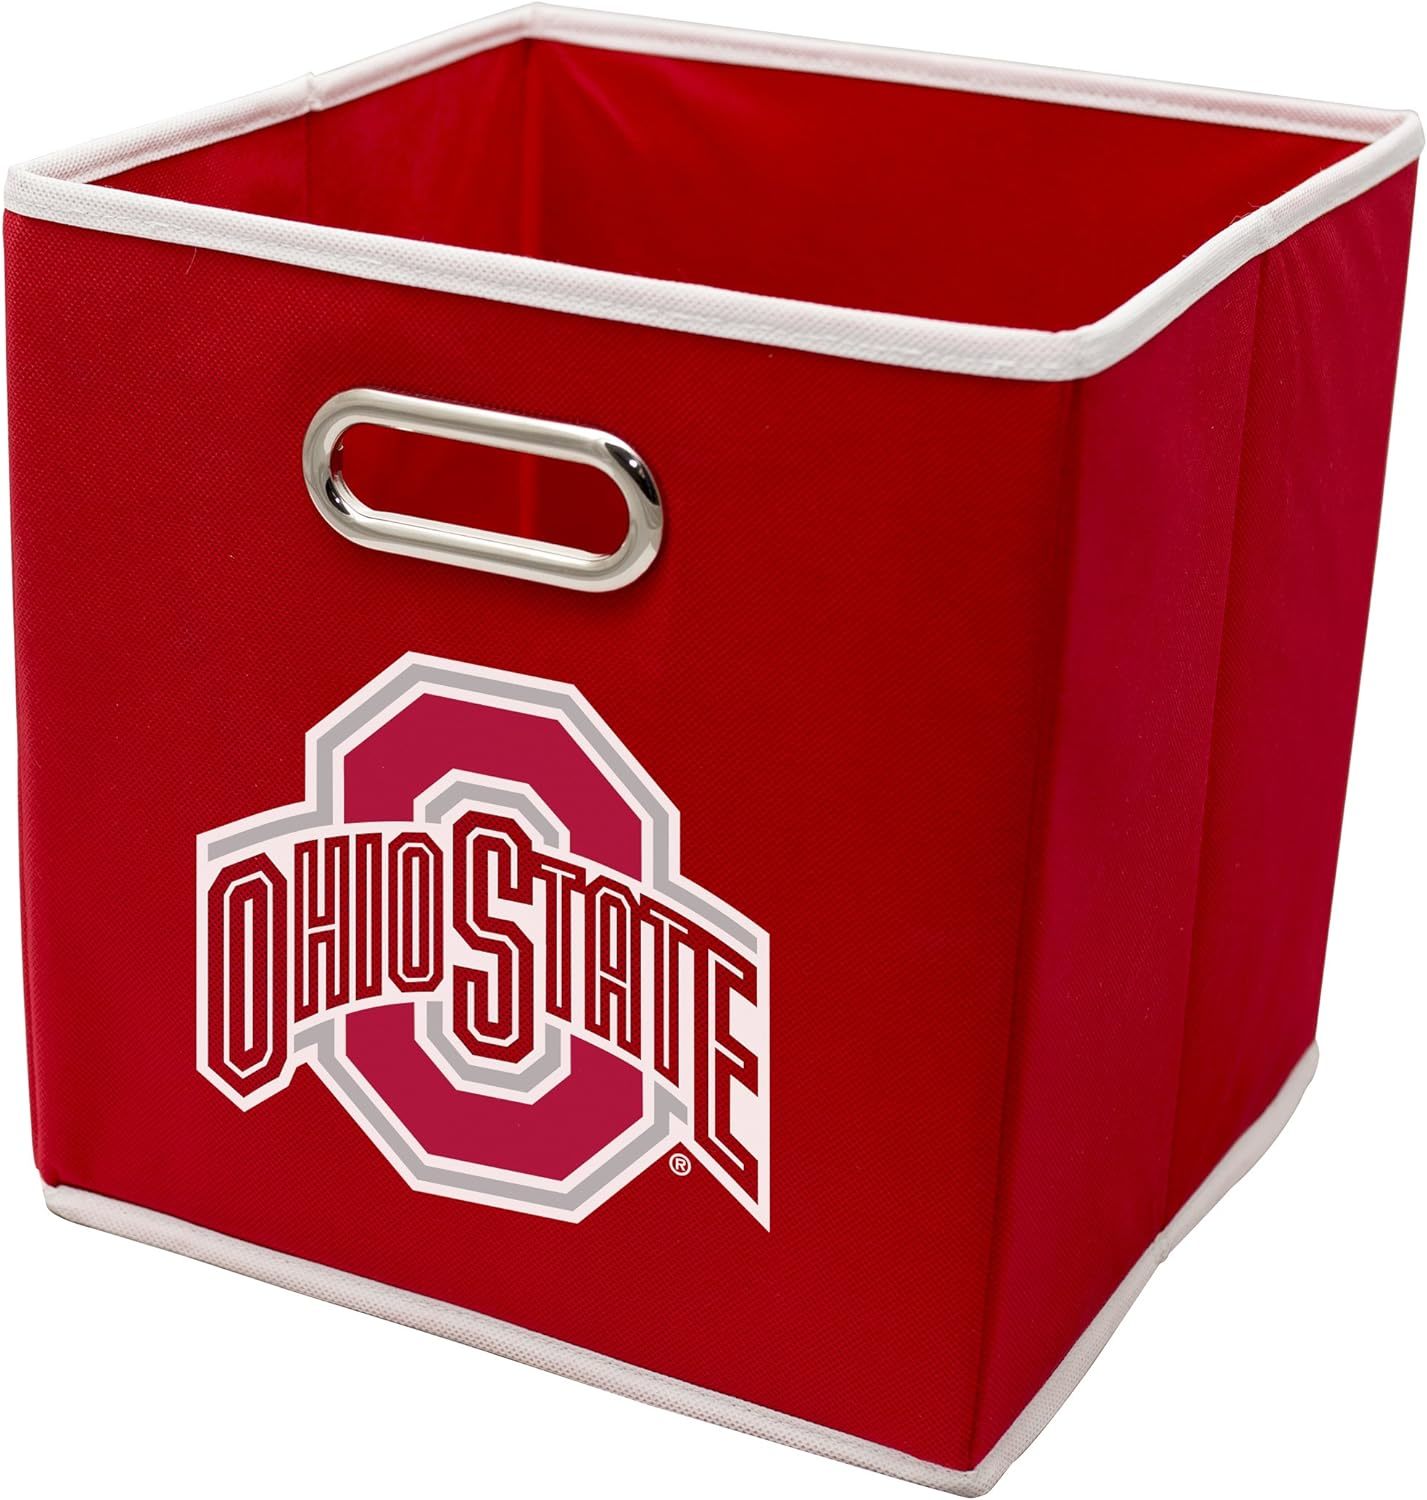 Primary image for Franklin Sports Ncaa College Team Fabric Storage Cubes Made To Fit, 11X10.5X10.5